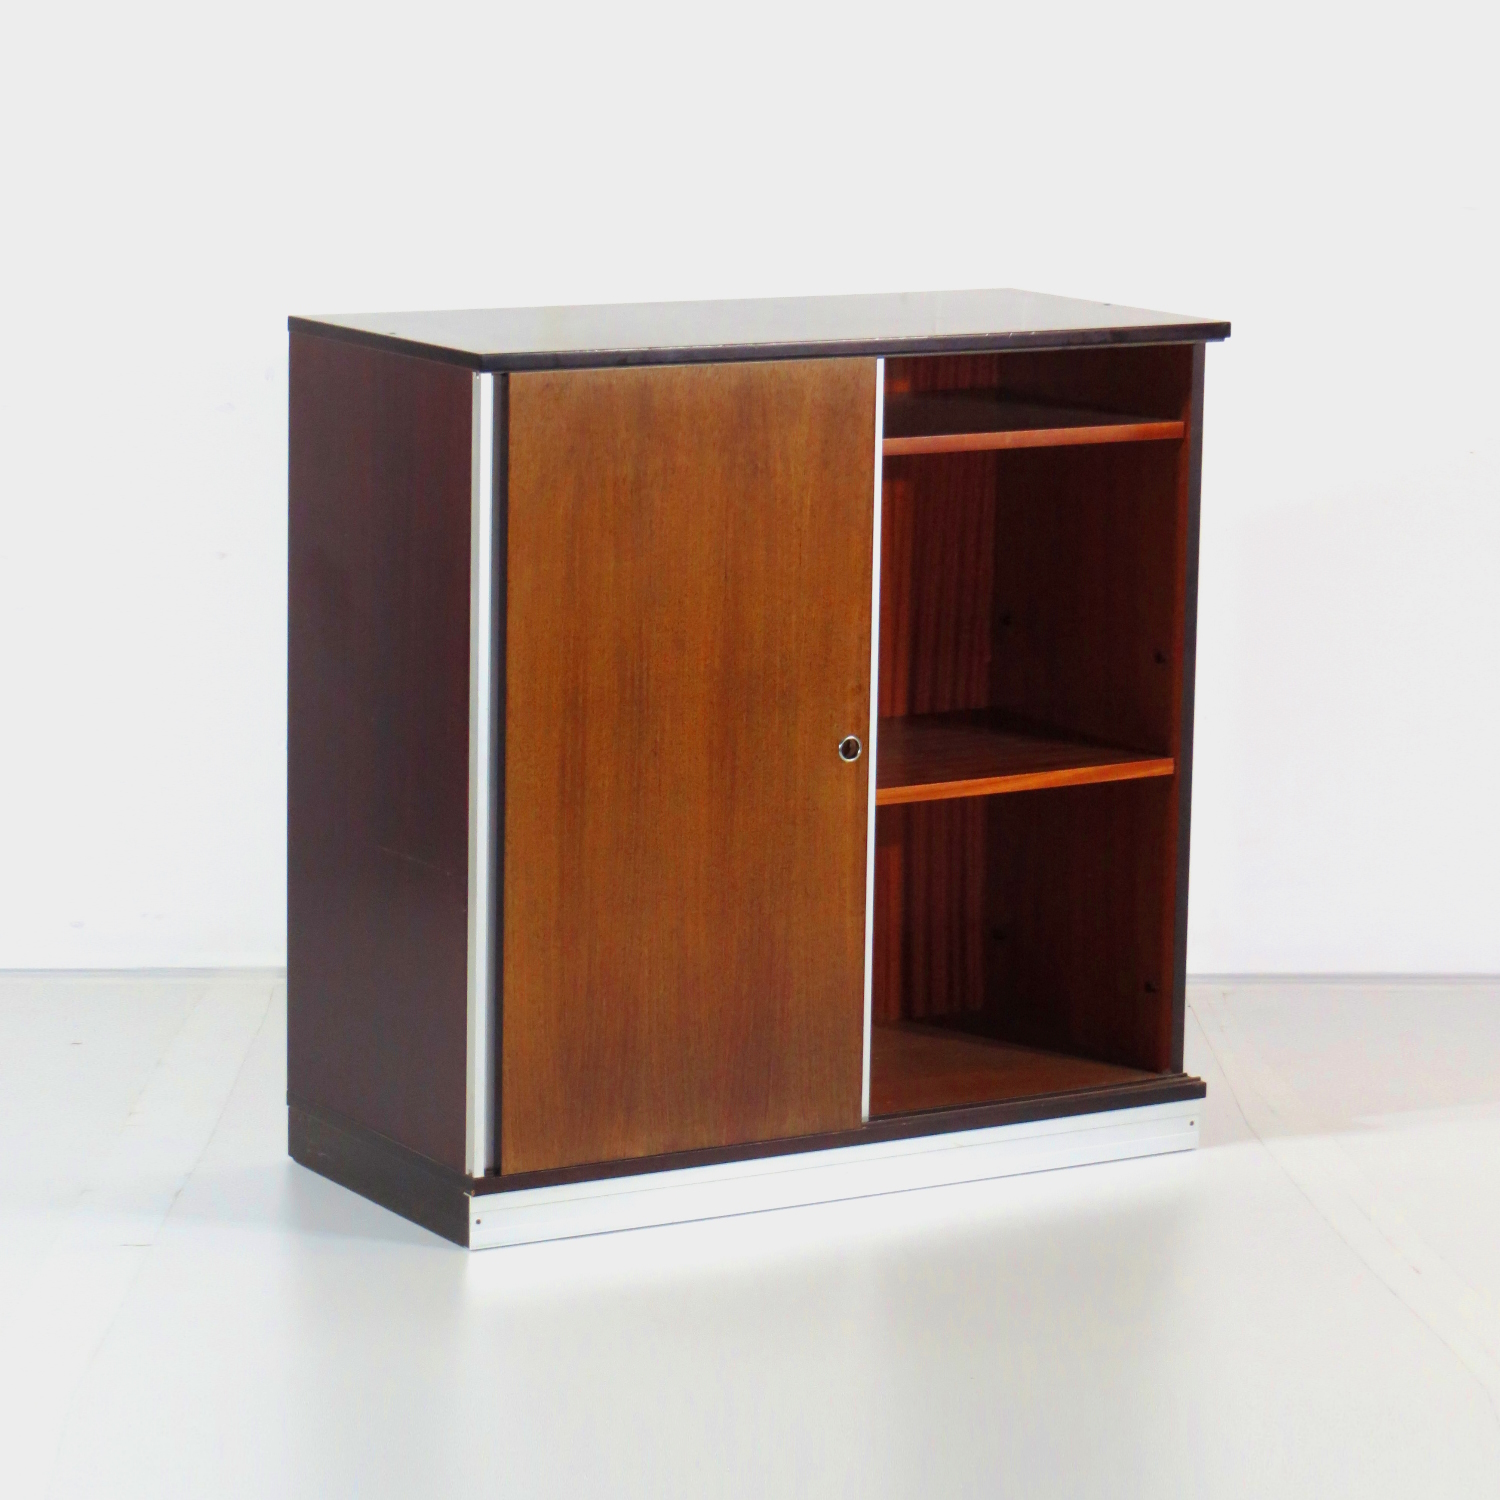 Photo of vintage rosewood sideboard cabinet with the right sliding door open